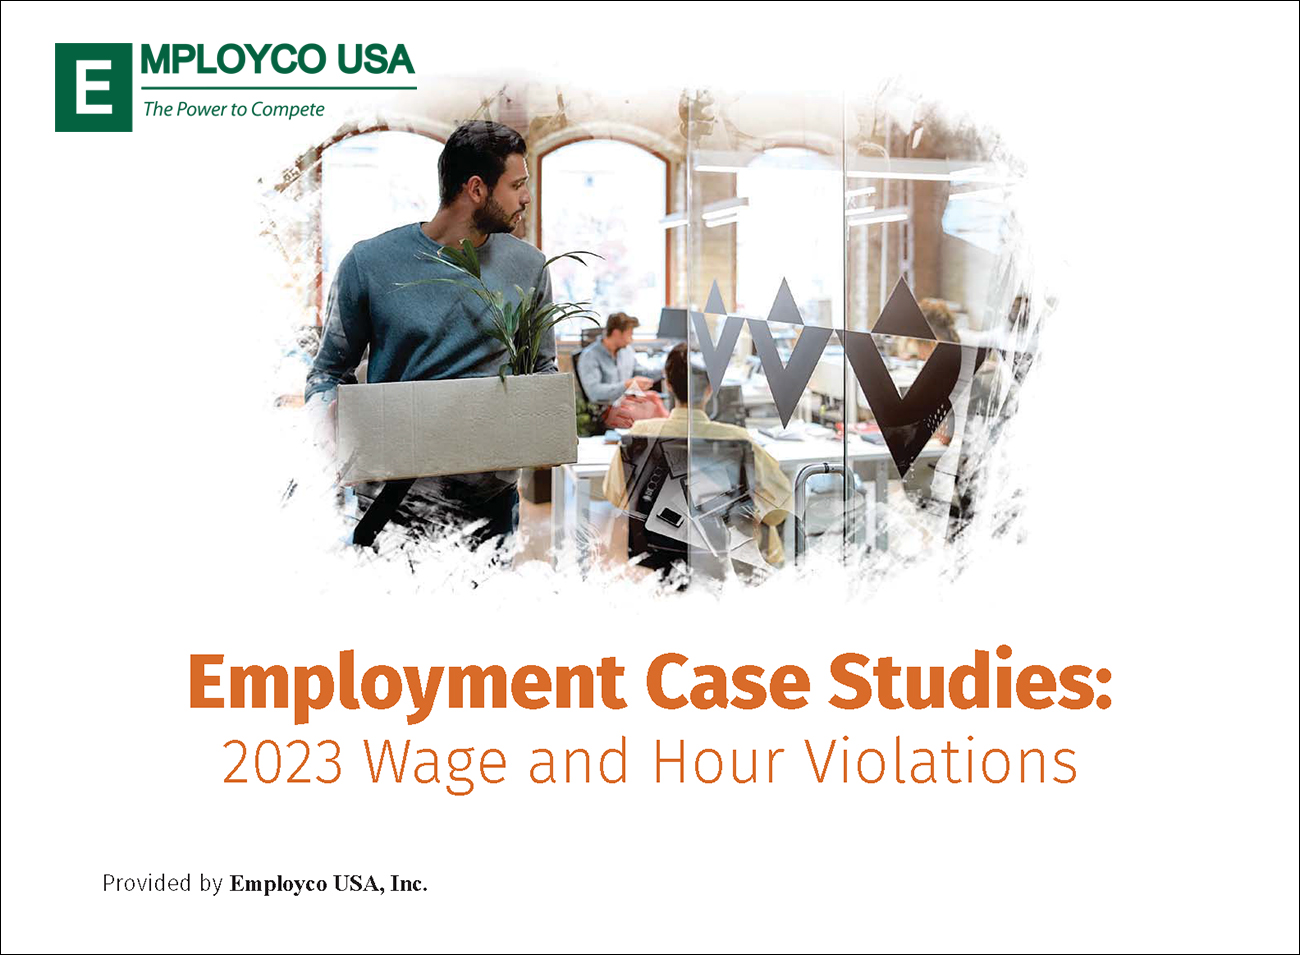 Employment Case Studies - 2023 Wage and Hour Violations